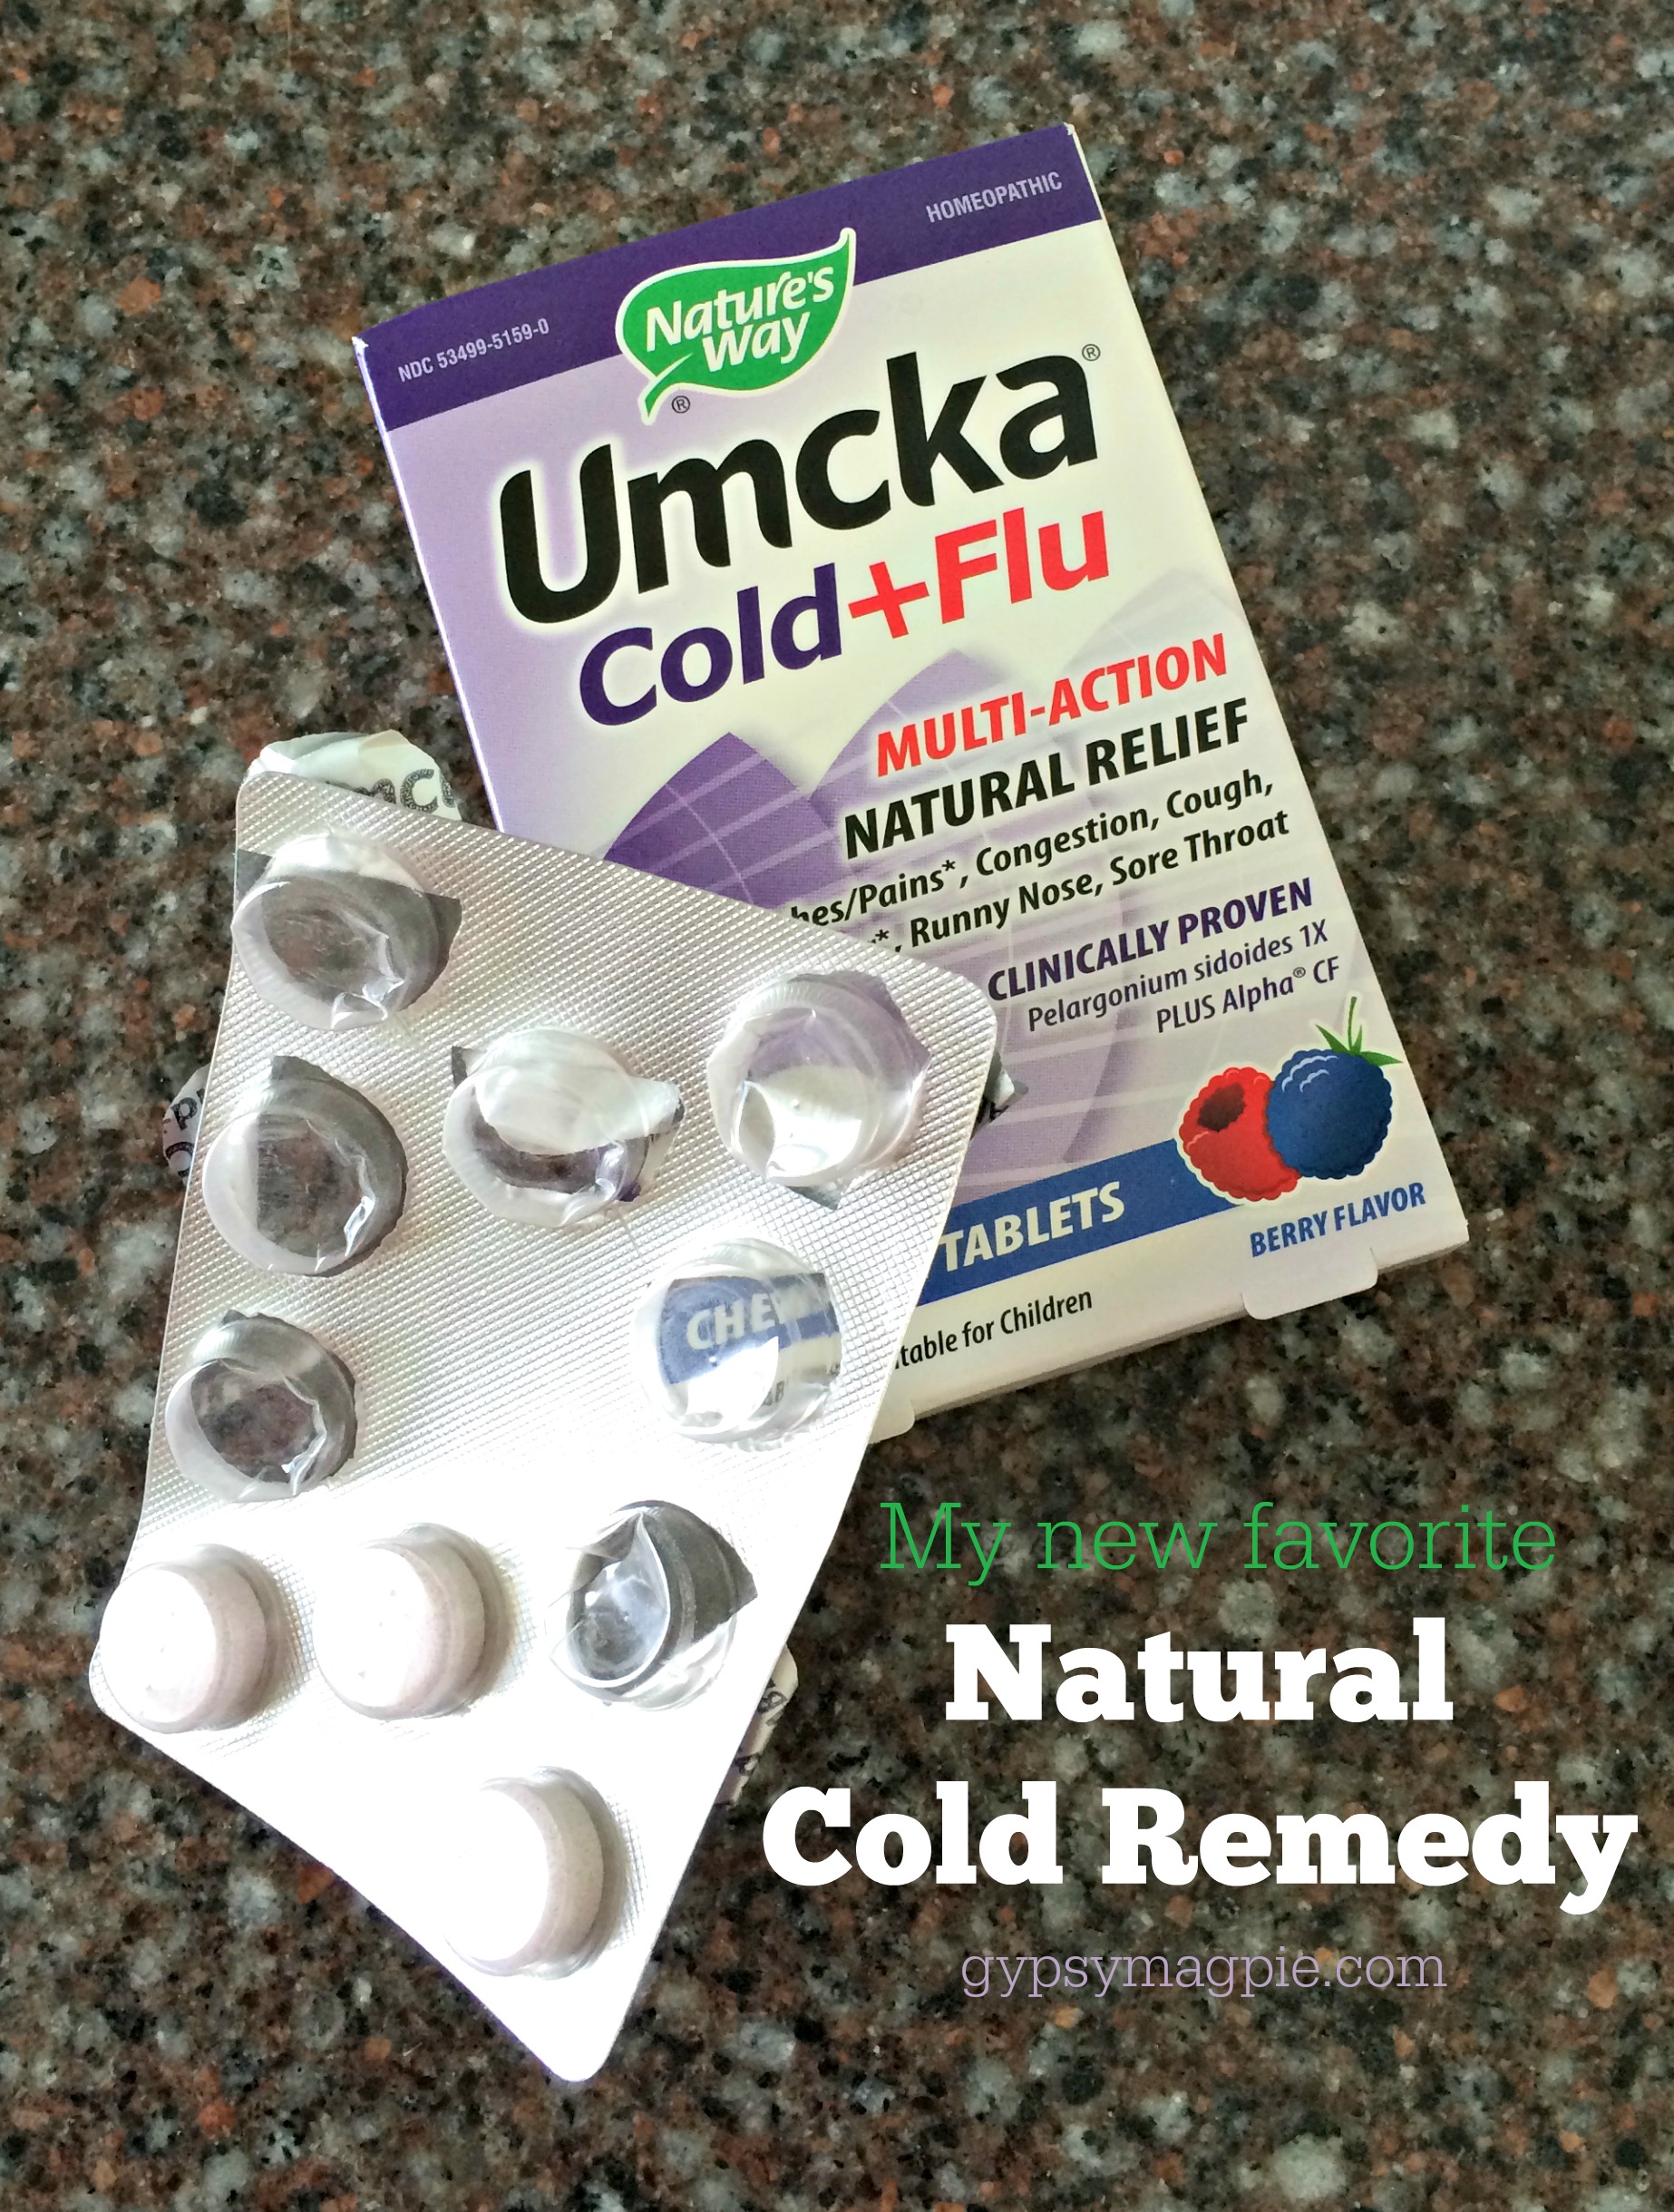 Umcka, my new favorite natural cold/flu remedy {Gypsy Magpie}